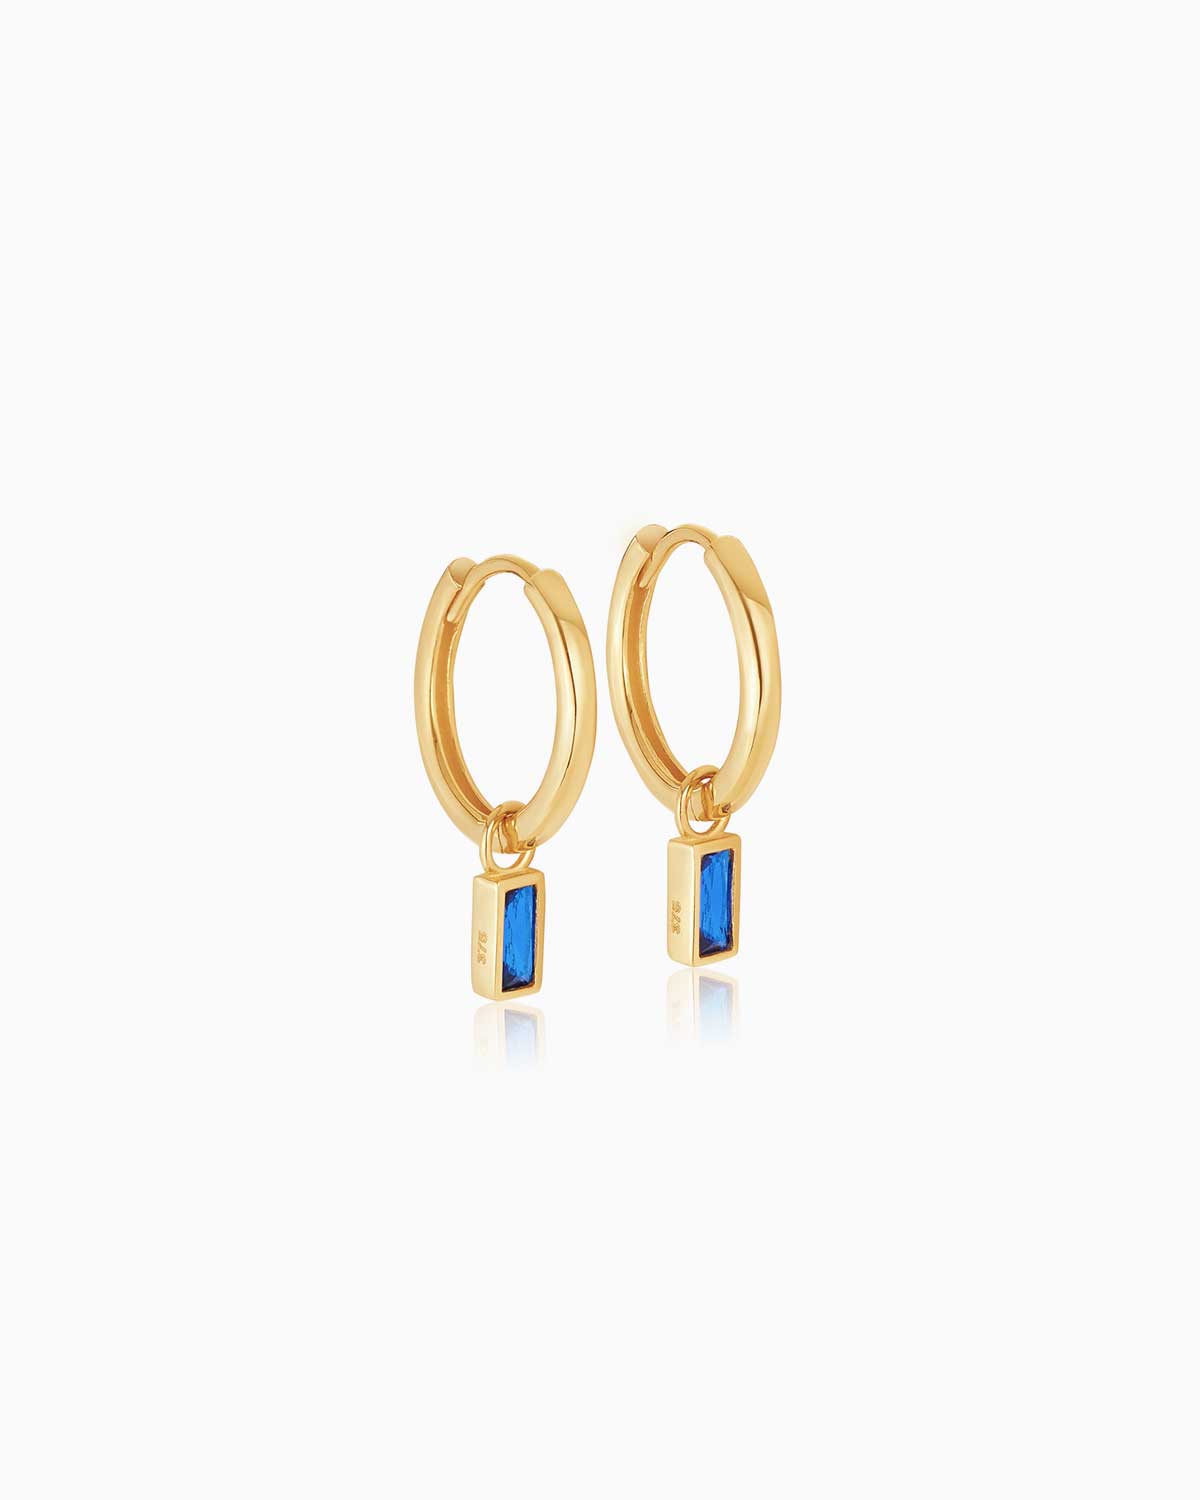 9 karat yellow gold charm hoop earrings with sapphire bezel set drops from the claude by Claudia collection.